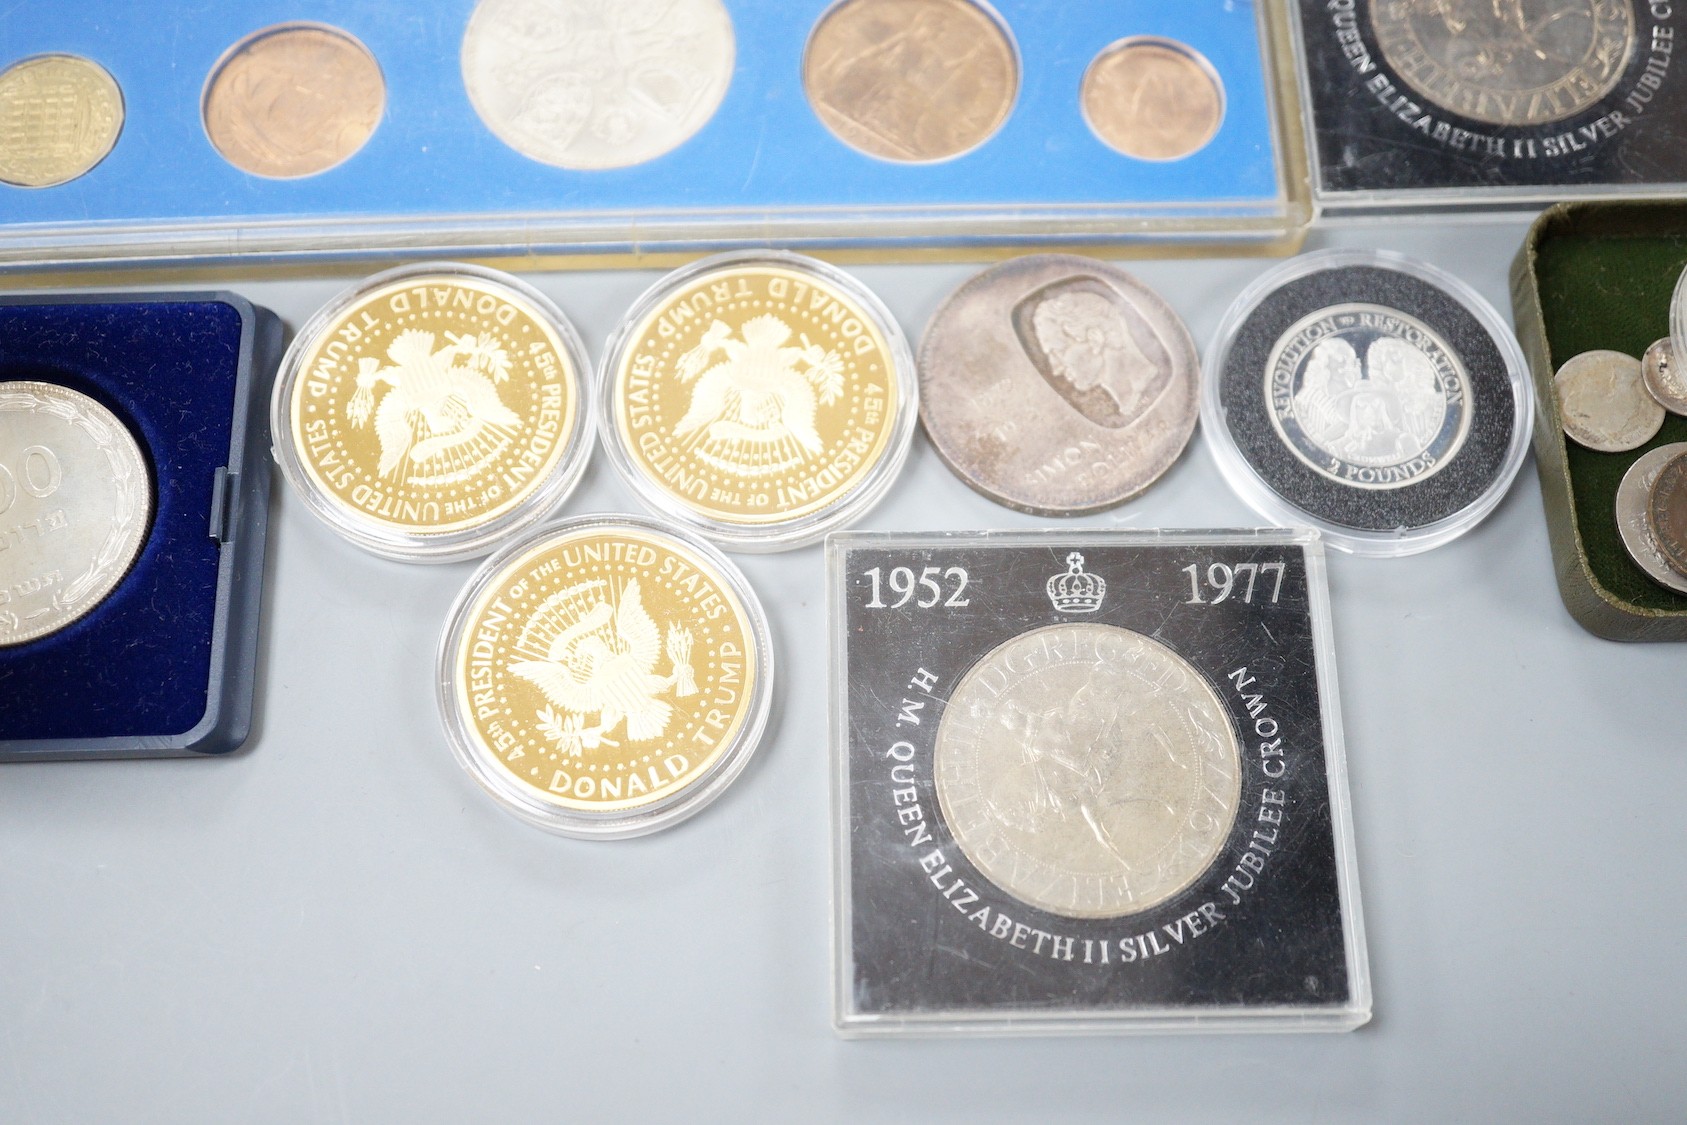 UK Royal Mint and World coins, including a 1799 penny, about UNC, a specimen set of QEII coronation 1953 coins, 2006 and 2010 £2 coins with minting errors, Venezuela 10 bolivares 1973, Donald Trump commemorative coins, a